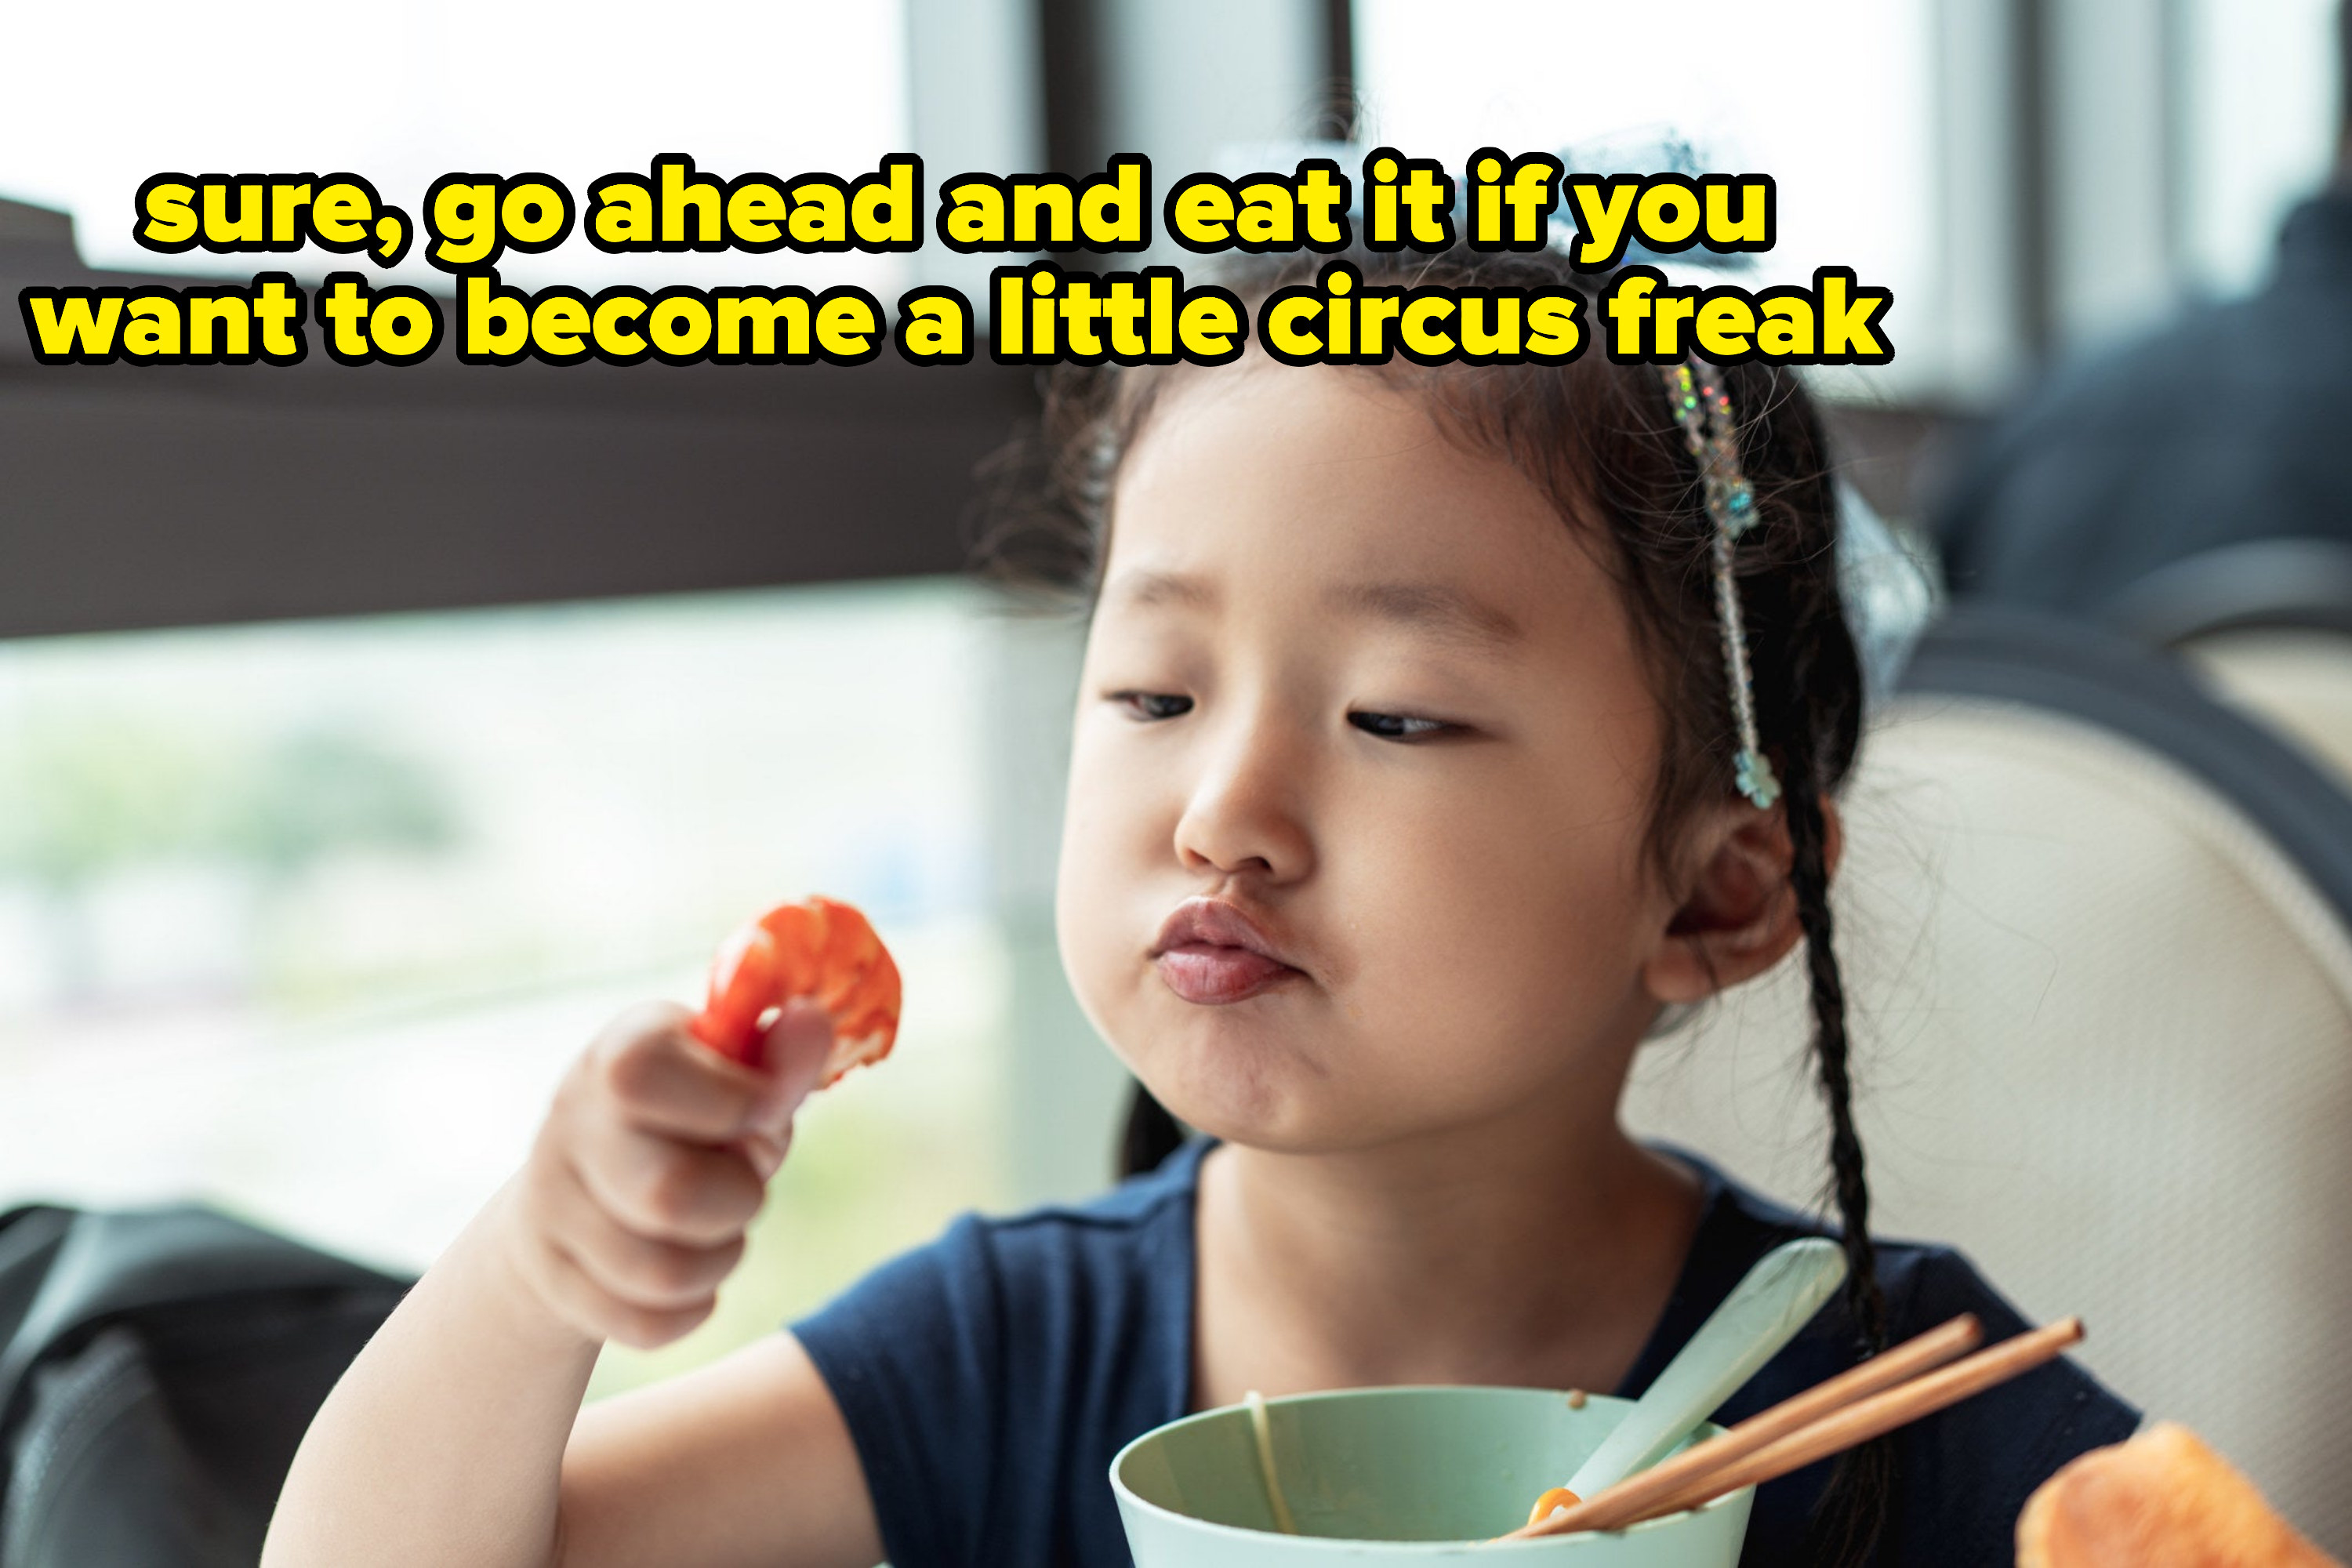 &quot;sure, go ahead and eat it if you want to become a little circus freak&quot;